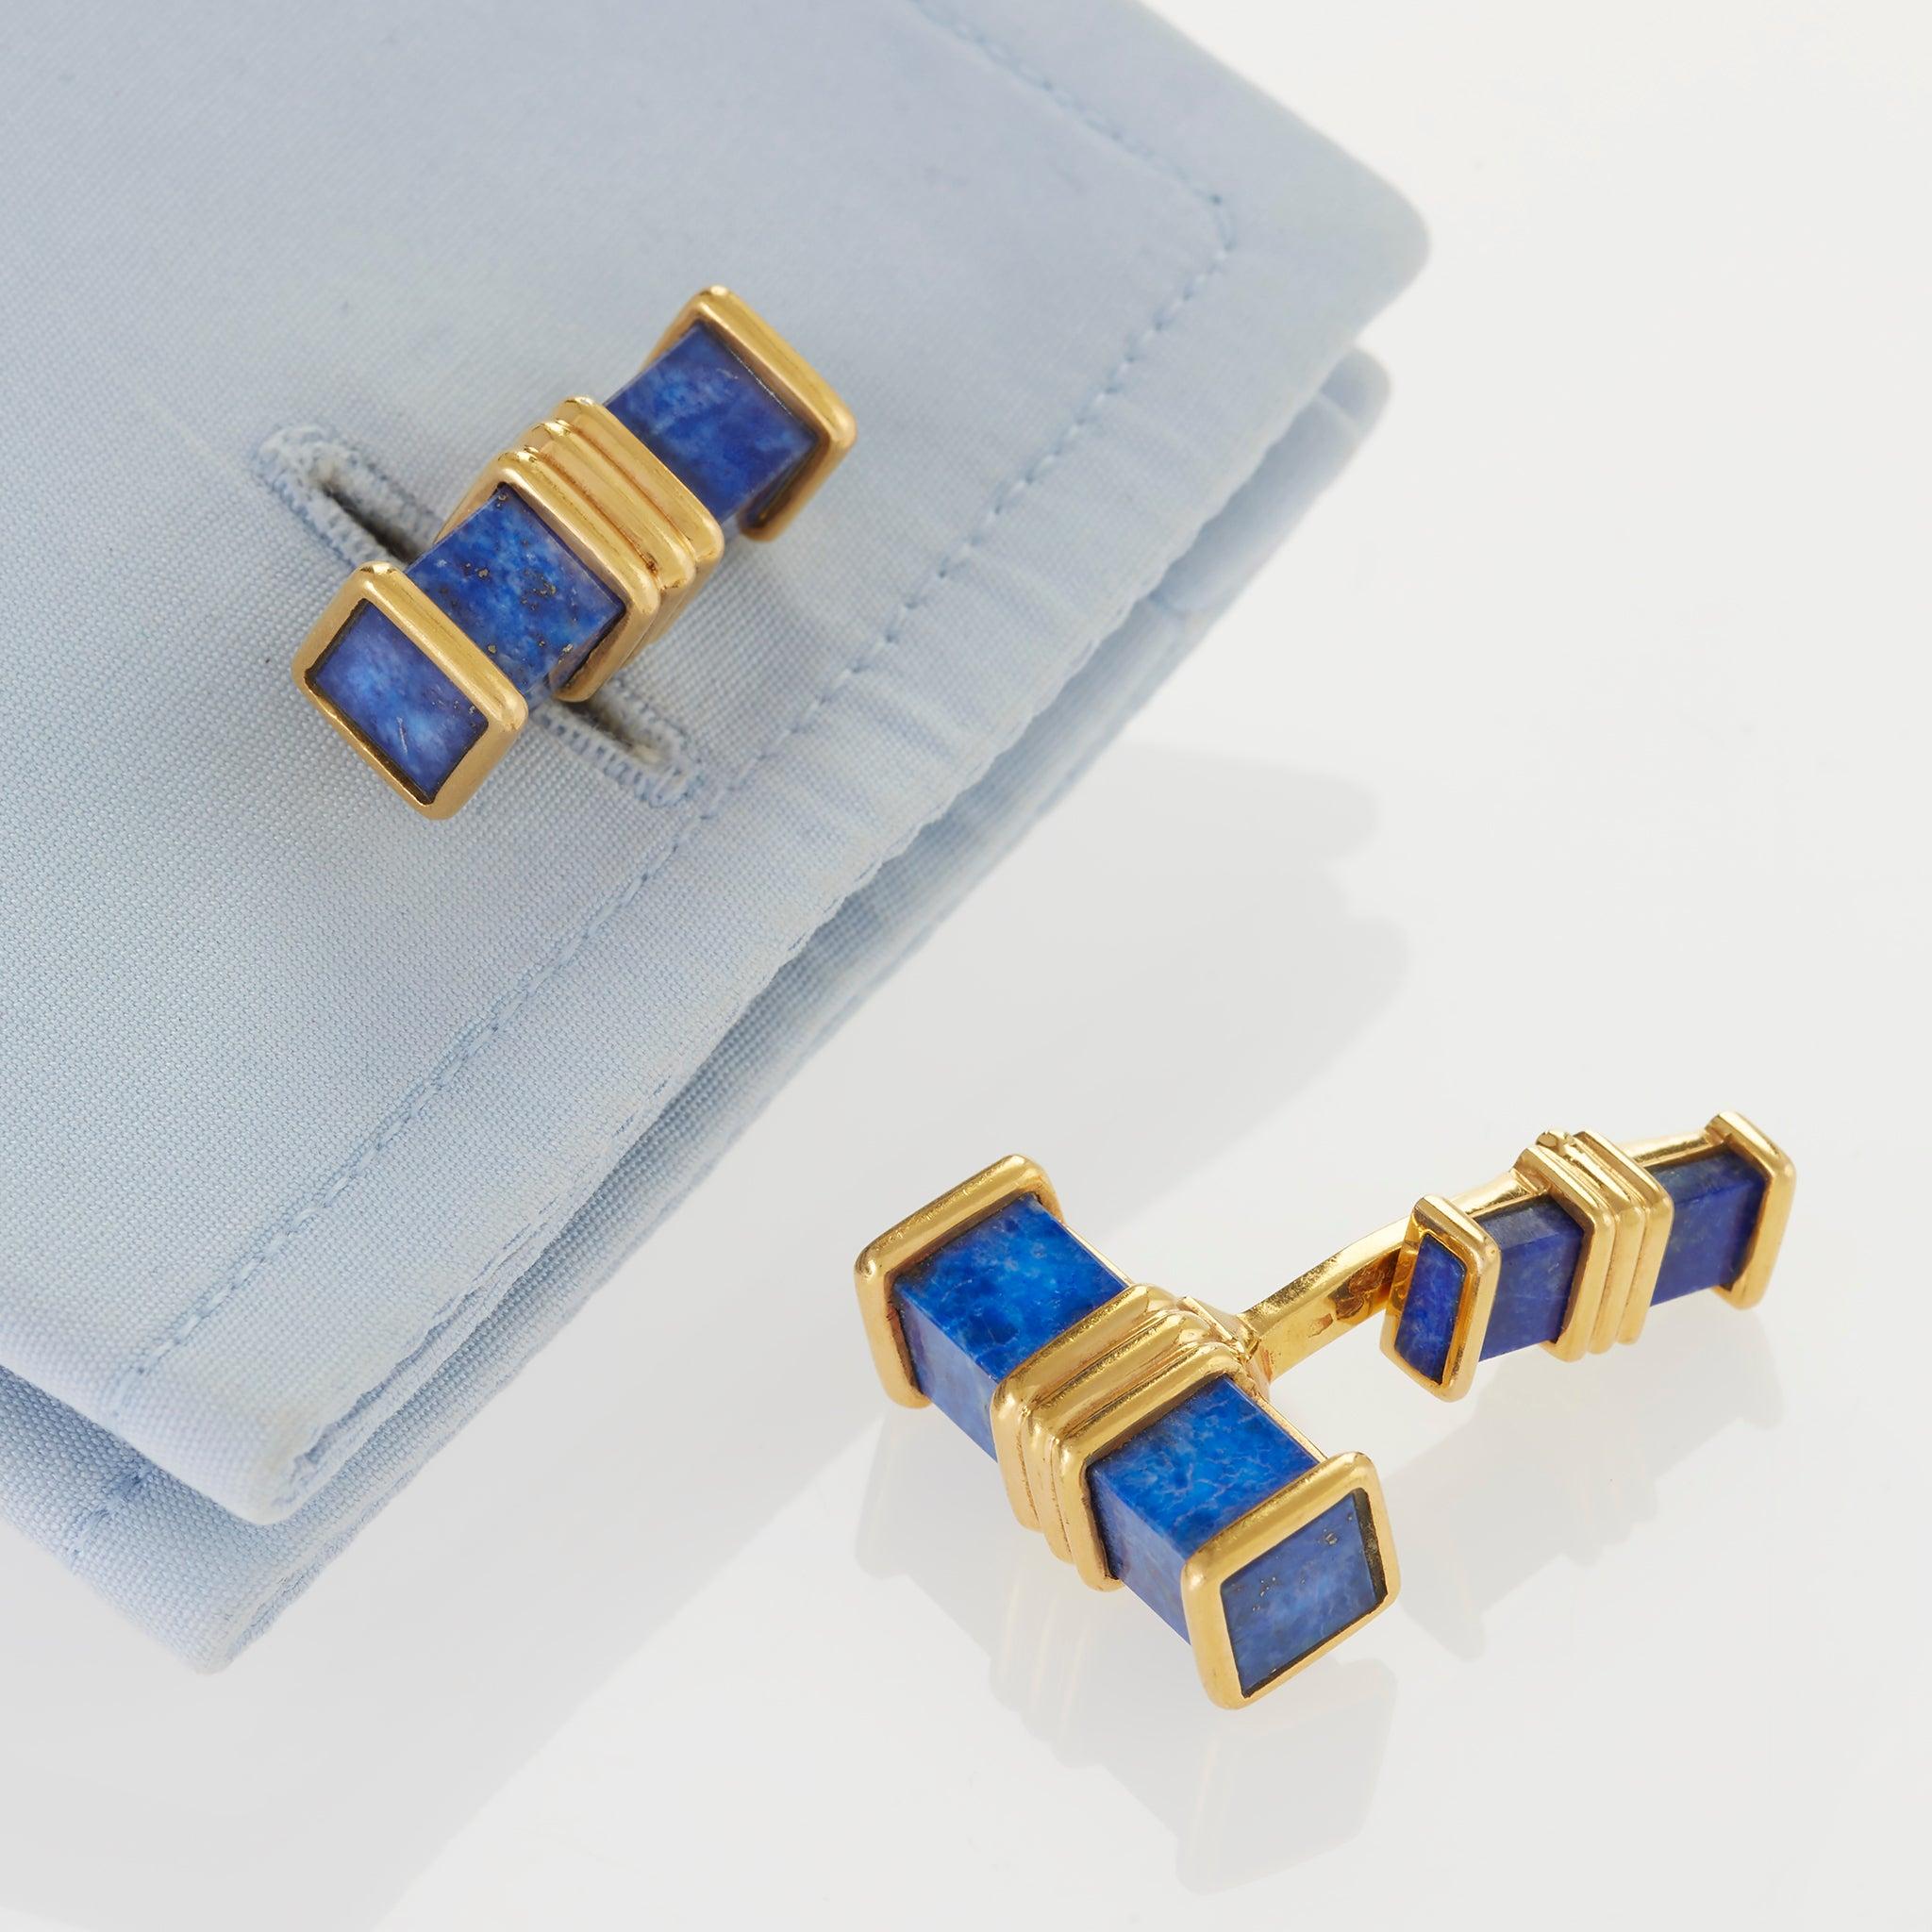 Created in the late 20th century by Fred, Paris, these cuff links are composed of lapis lazuli and 18K gold. Each double link is designed as a rectangular baton bound by a ridged mount, and joined by a gently curved bar to a smaller conforming lapis